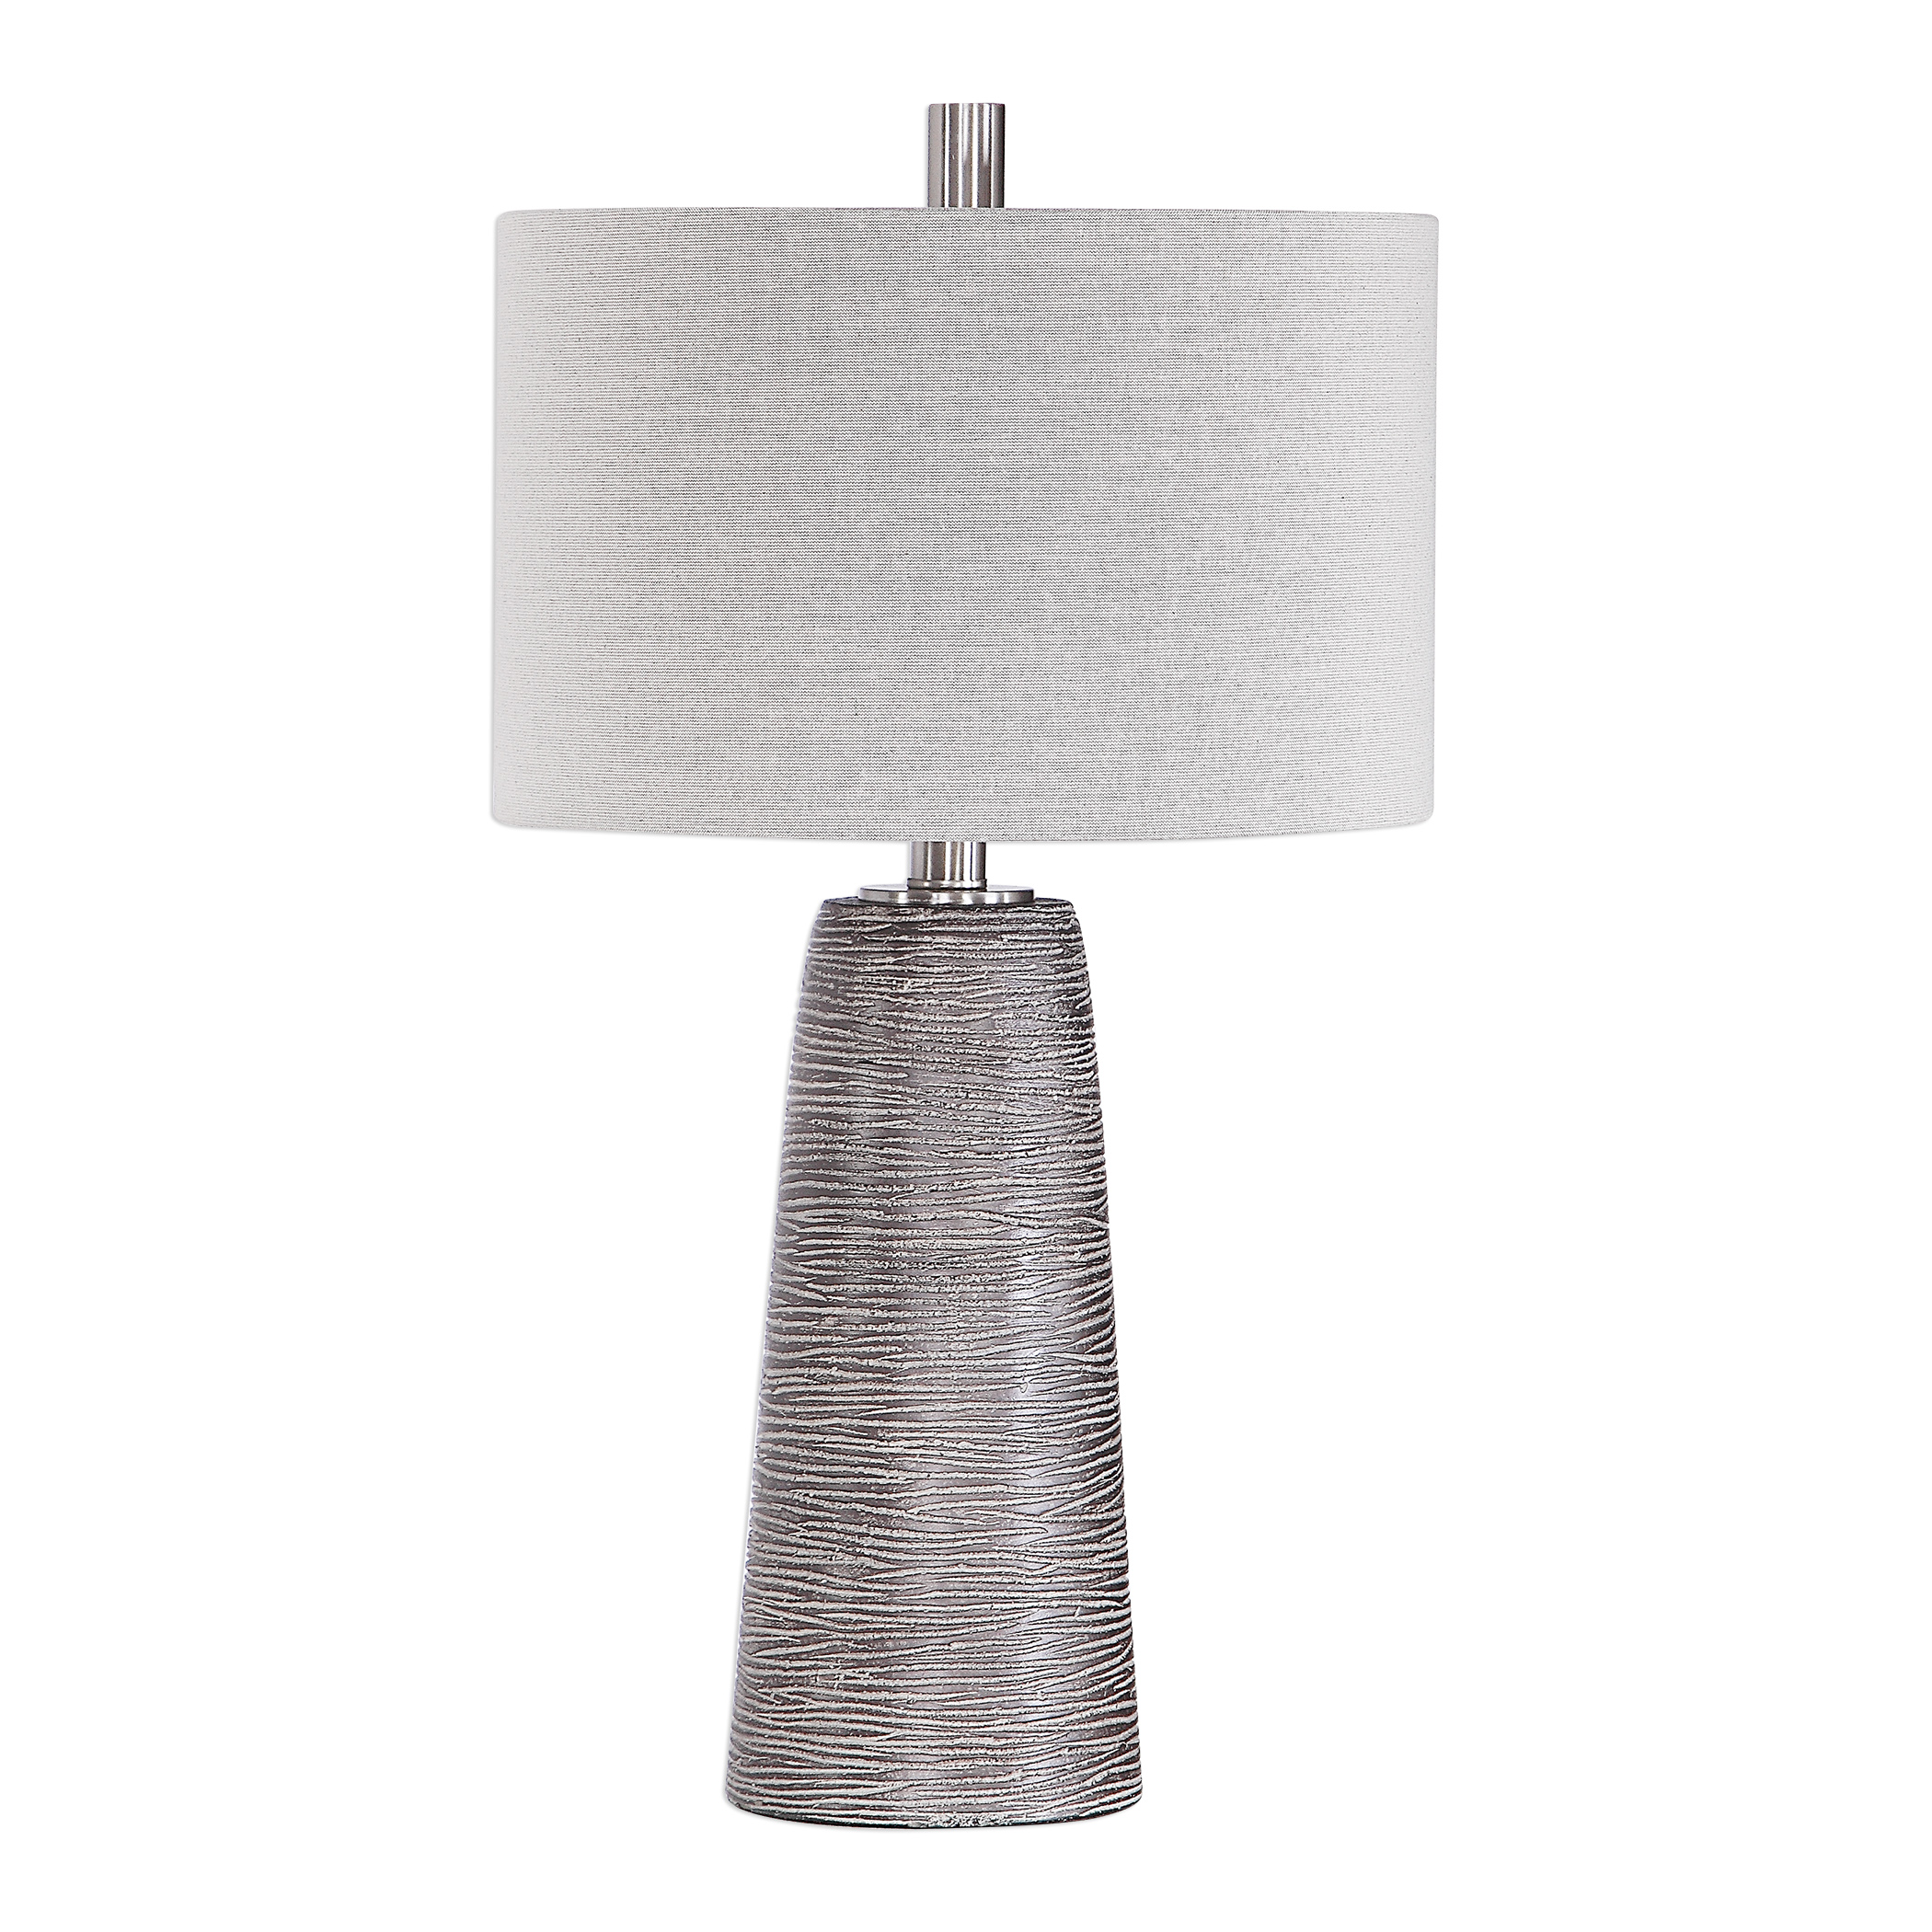 Bronze Ceramic Table Lamp - Hudsonhill Foundry | Havenly